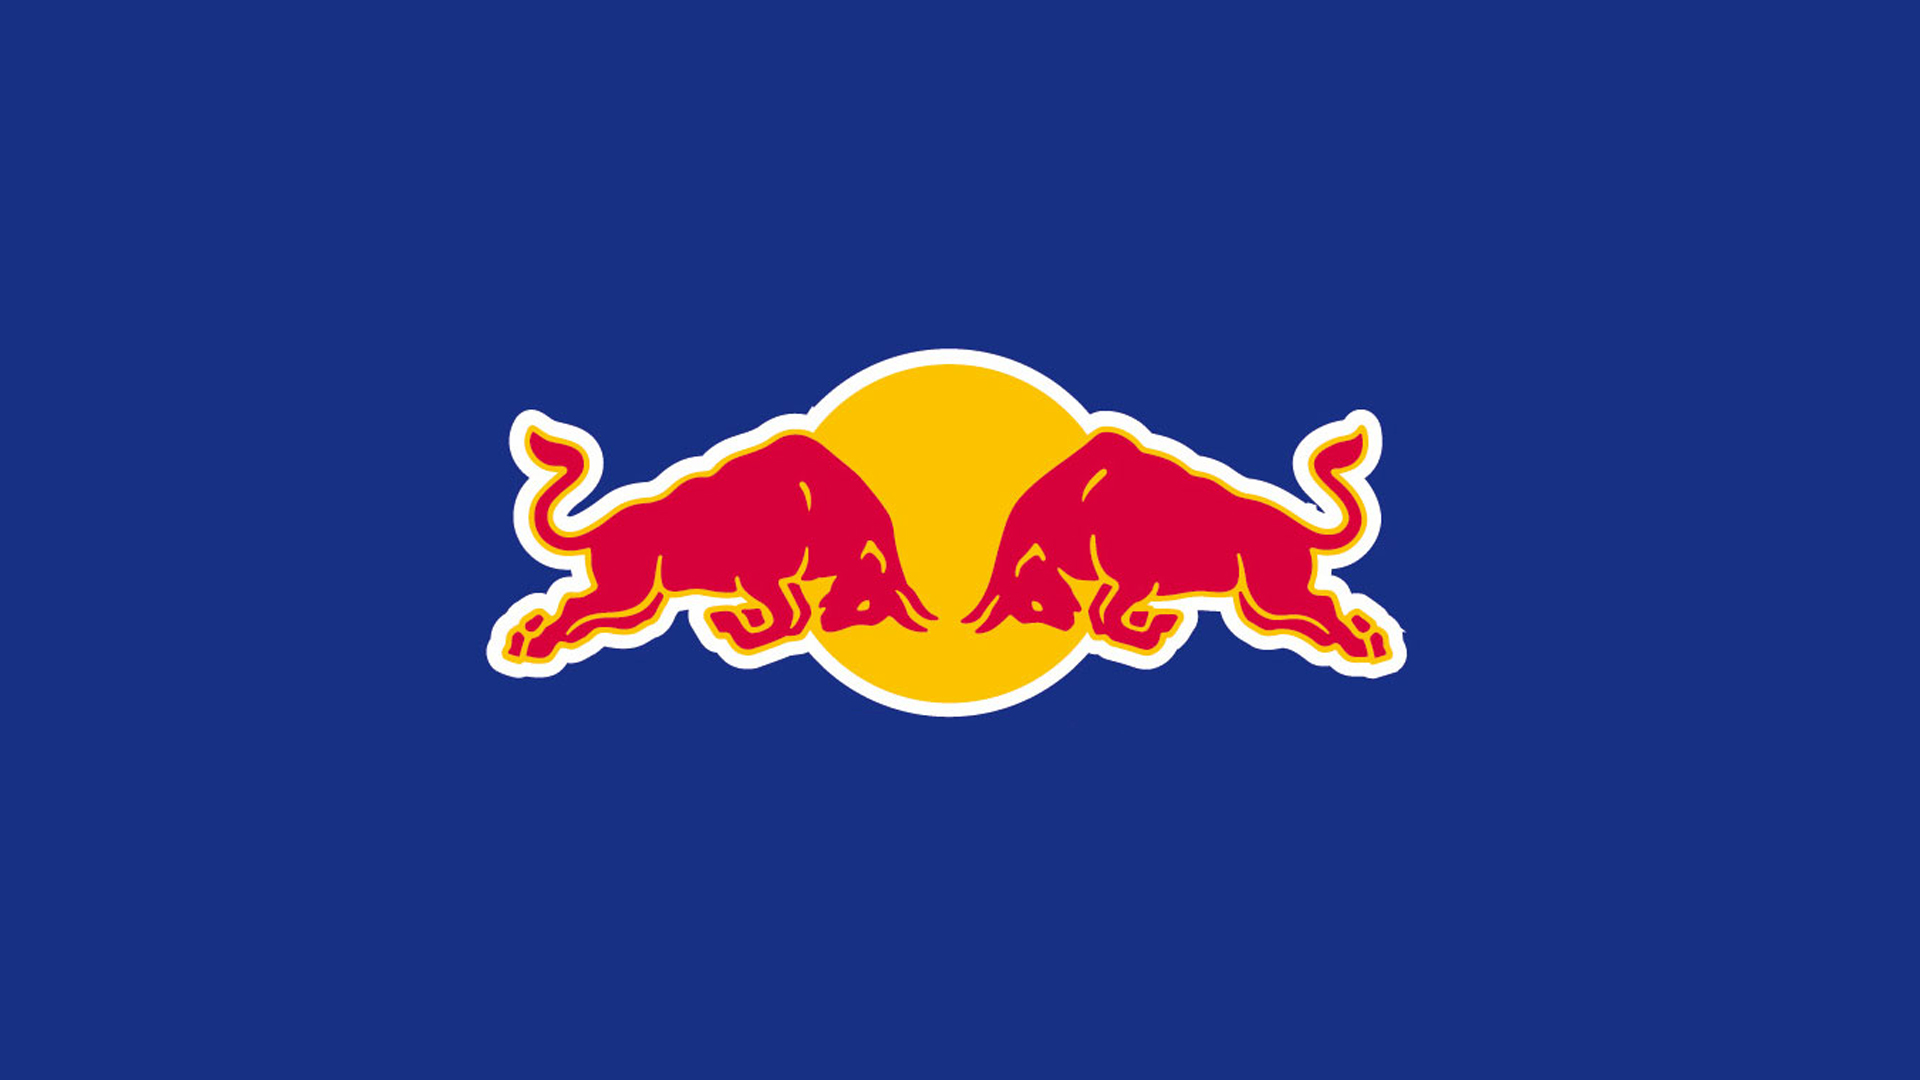 Free Download Hd Redbull Wallpapers And Photos Hd Others Wallpapers 19x1080 For Your Desktop Mobile Tablet Explore 76 Redbull Wallpapers Redbull Wallpapers Redbull Wallpaper